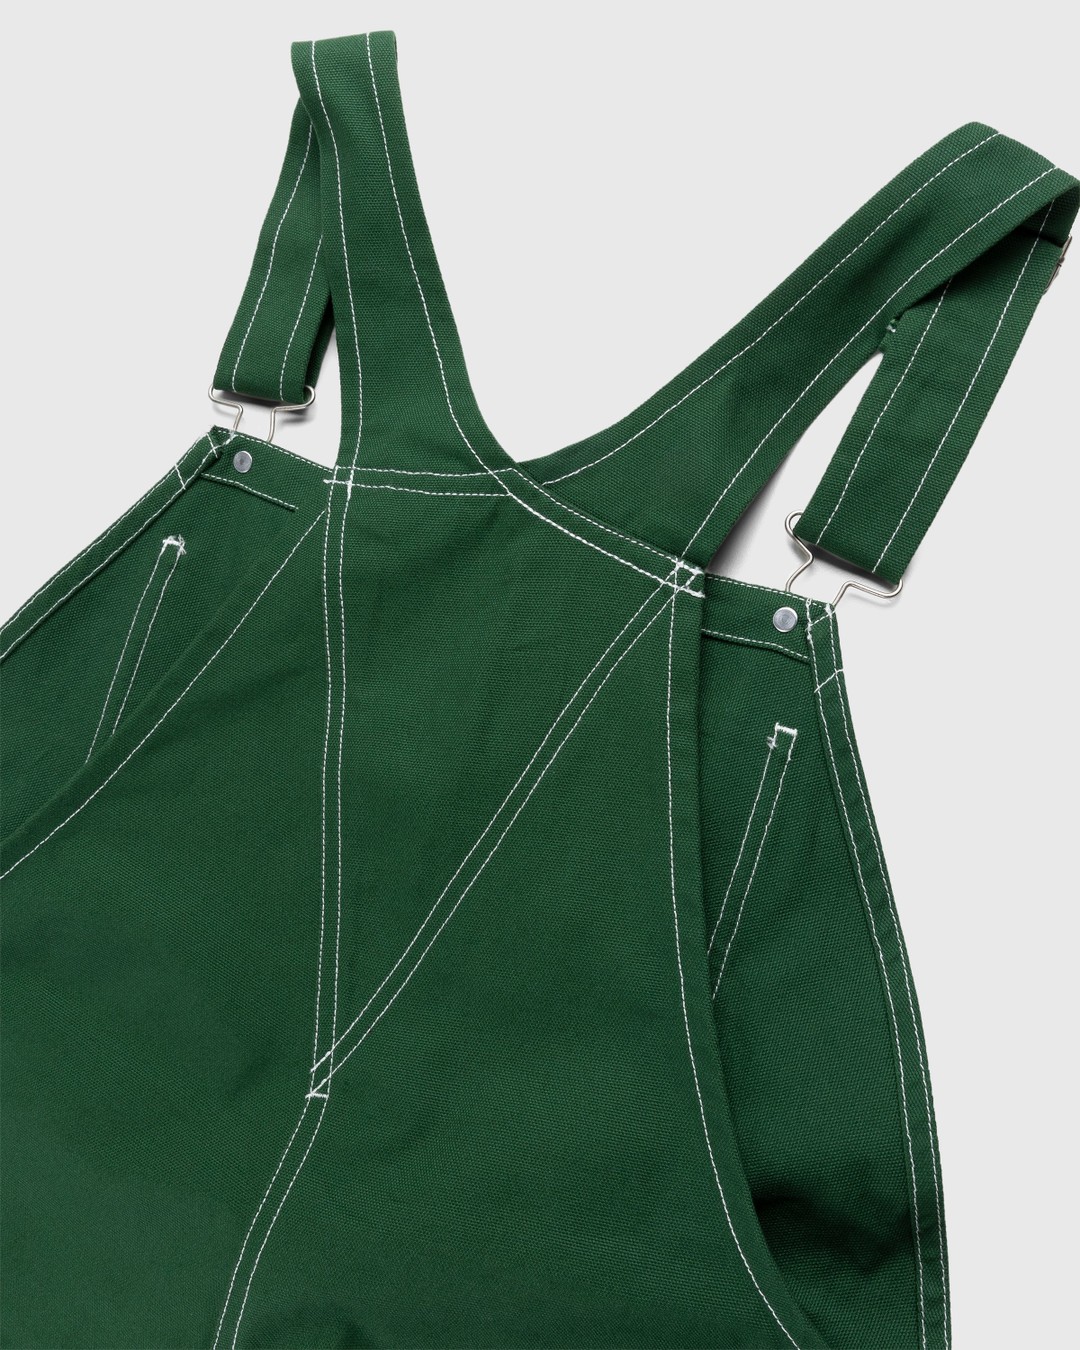 RUF x Highsnobiety – Cotton Overalls Green - Trousers - Green - Image 4